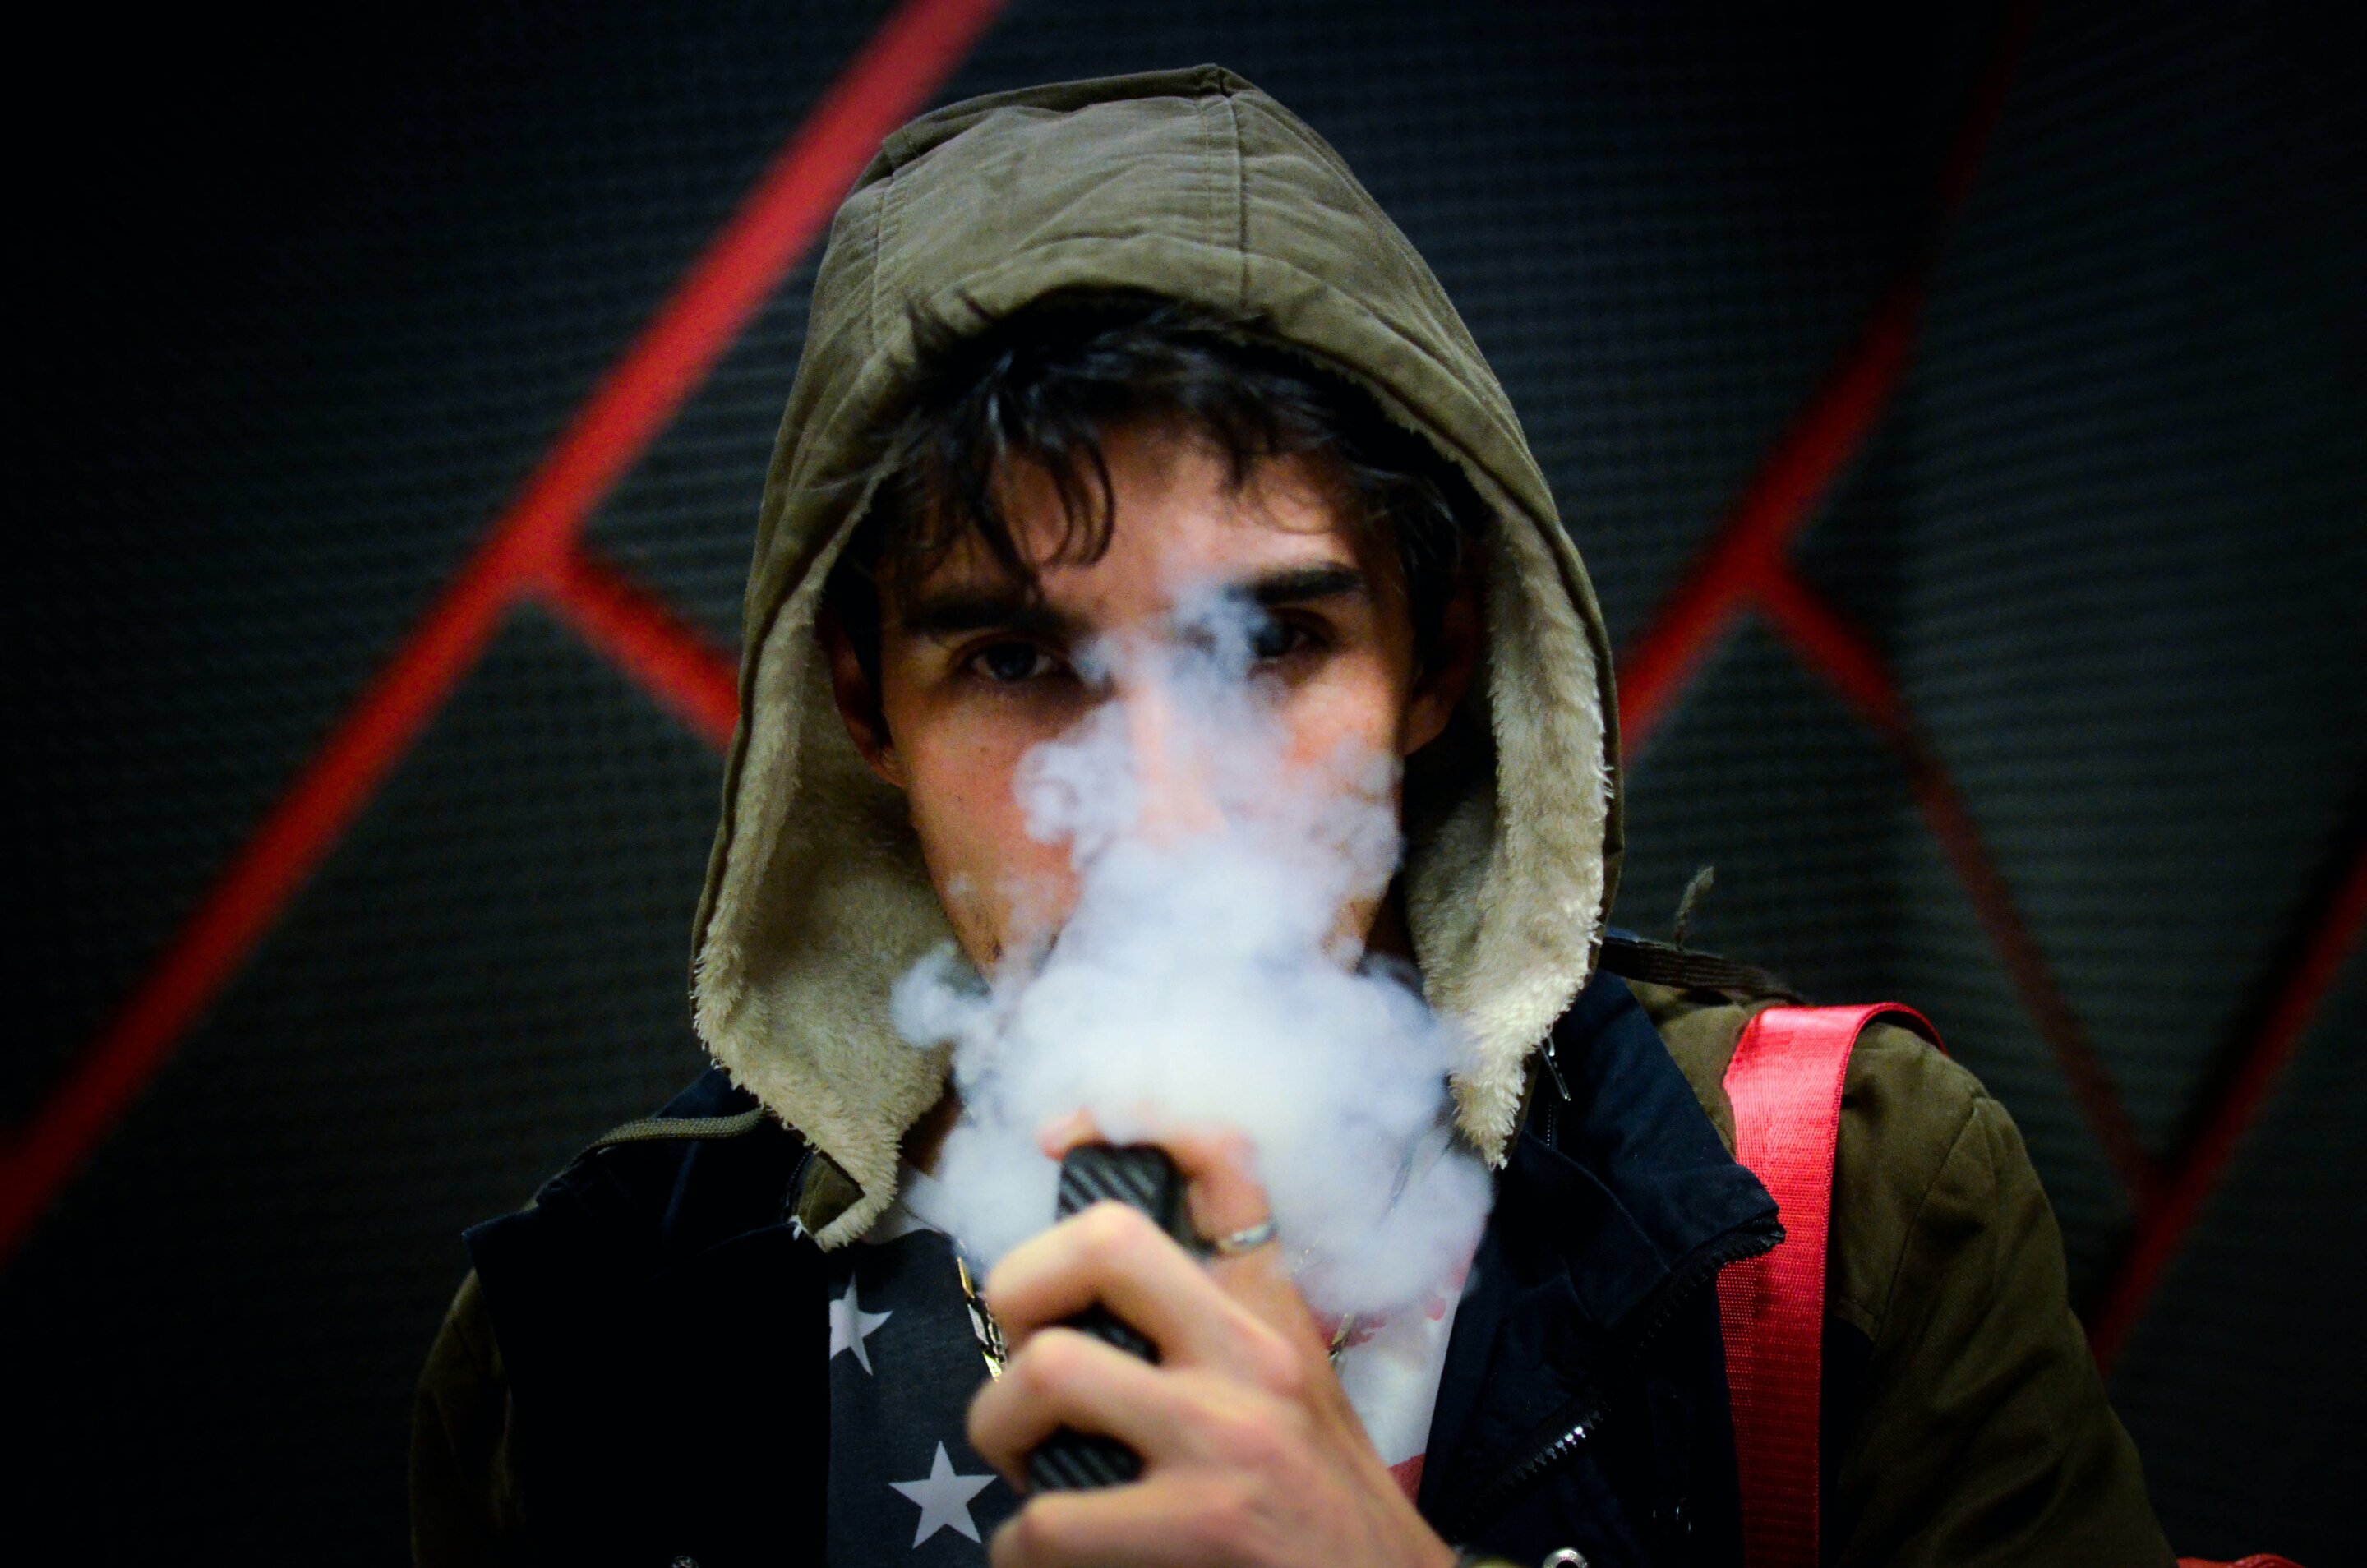 New national study finds adolescent vapers much likelier to use cannabis and binge drink